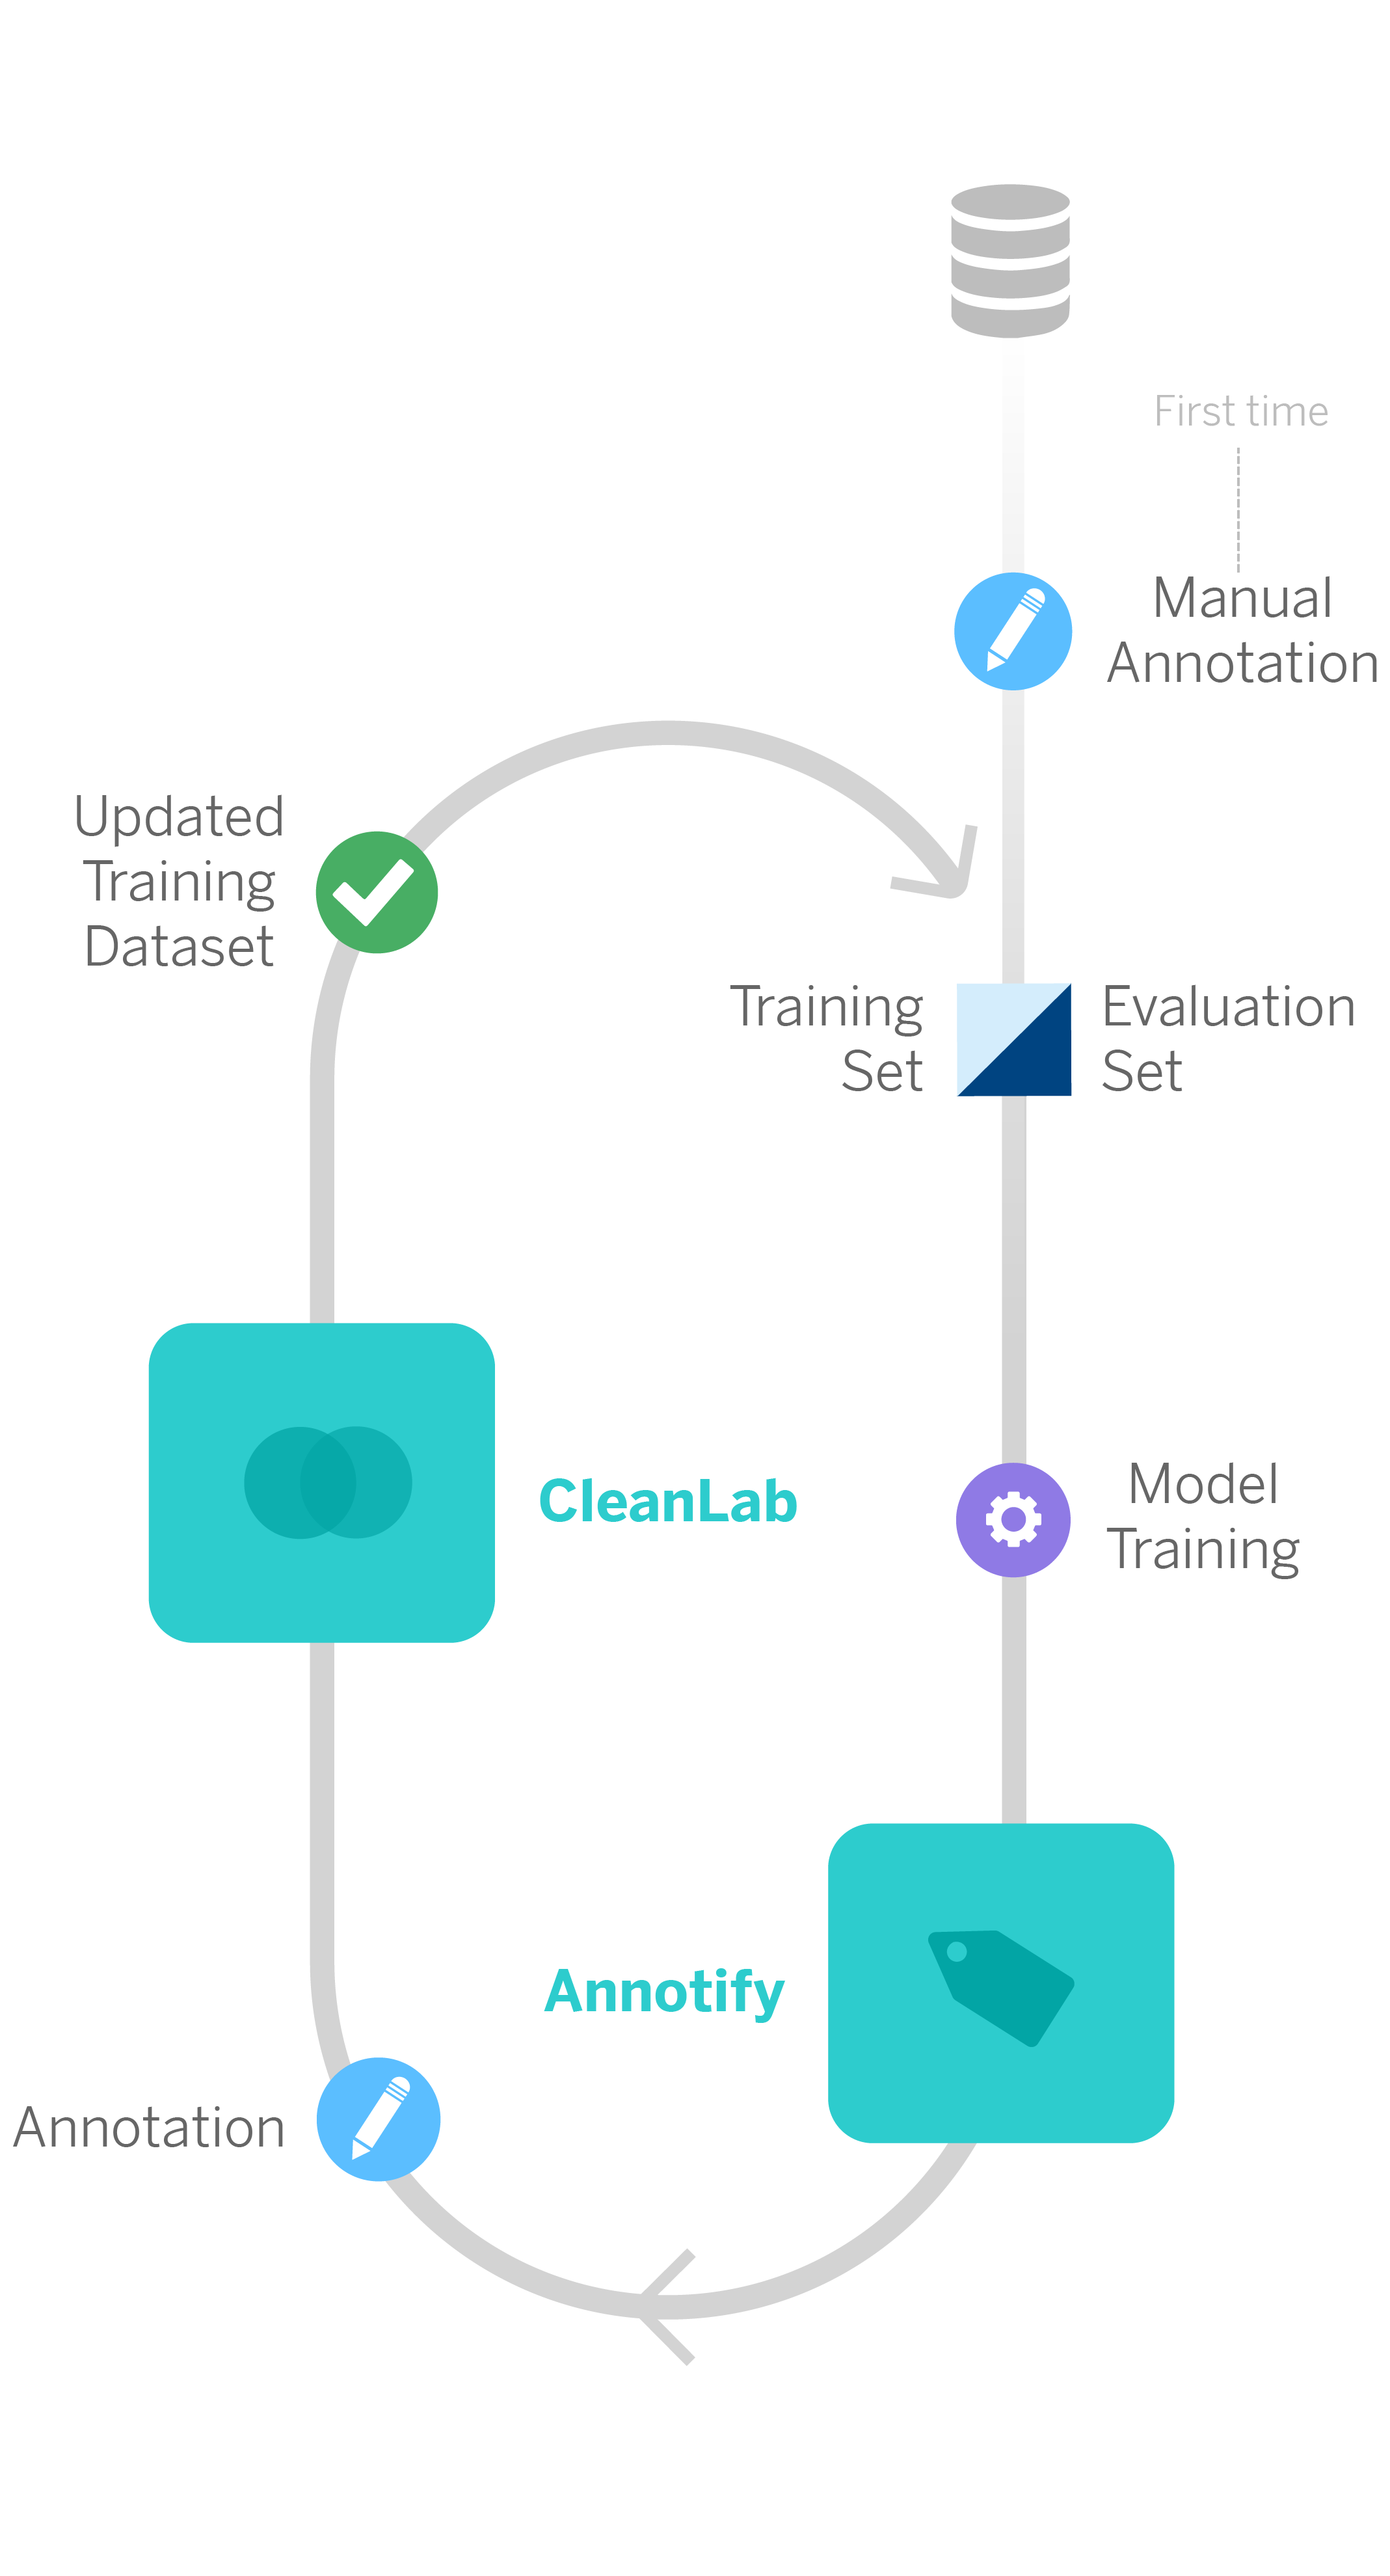 We trained a first model starting from a first manual annotation and divided the samples into two sets: training and evaluation. Subsequently, Annotify proposes new samples to be labeled, which are corrected by CleanLab when there are discrepancies. With this updated dataset, we can re-train a new model and repeat the cycle.